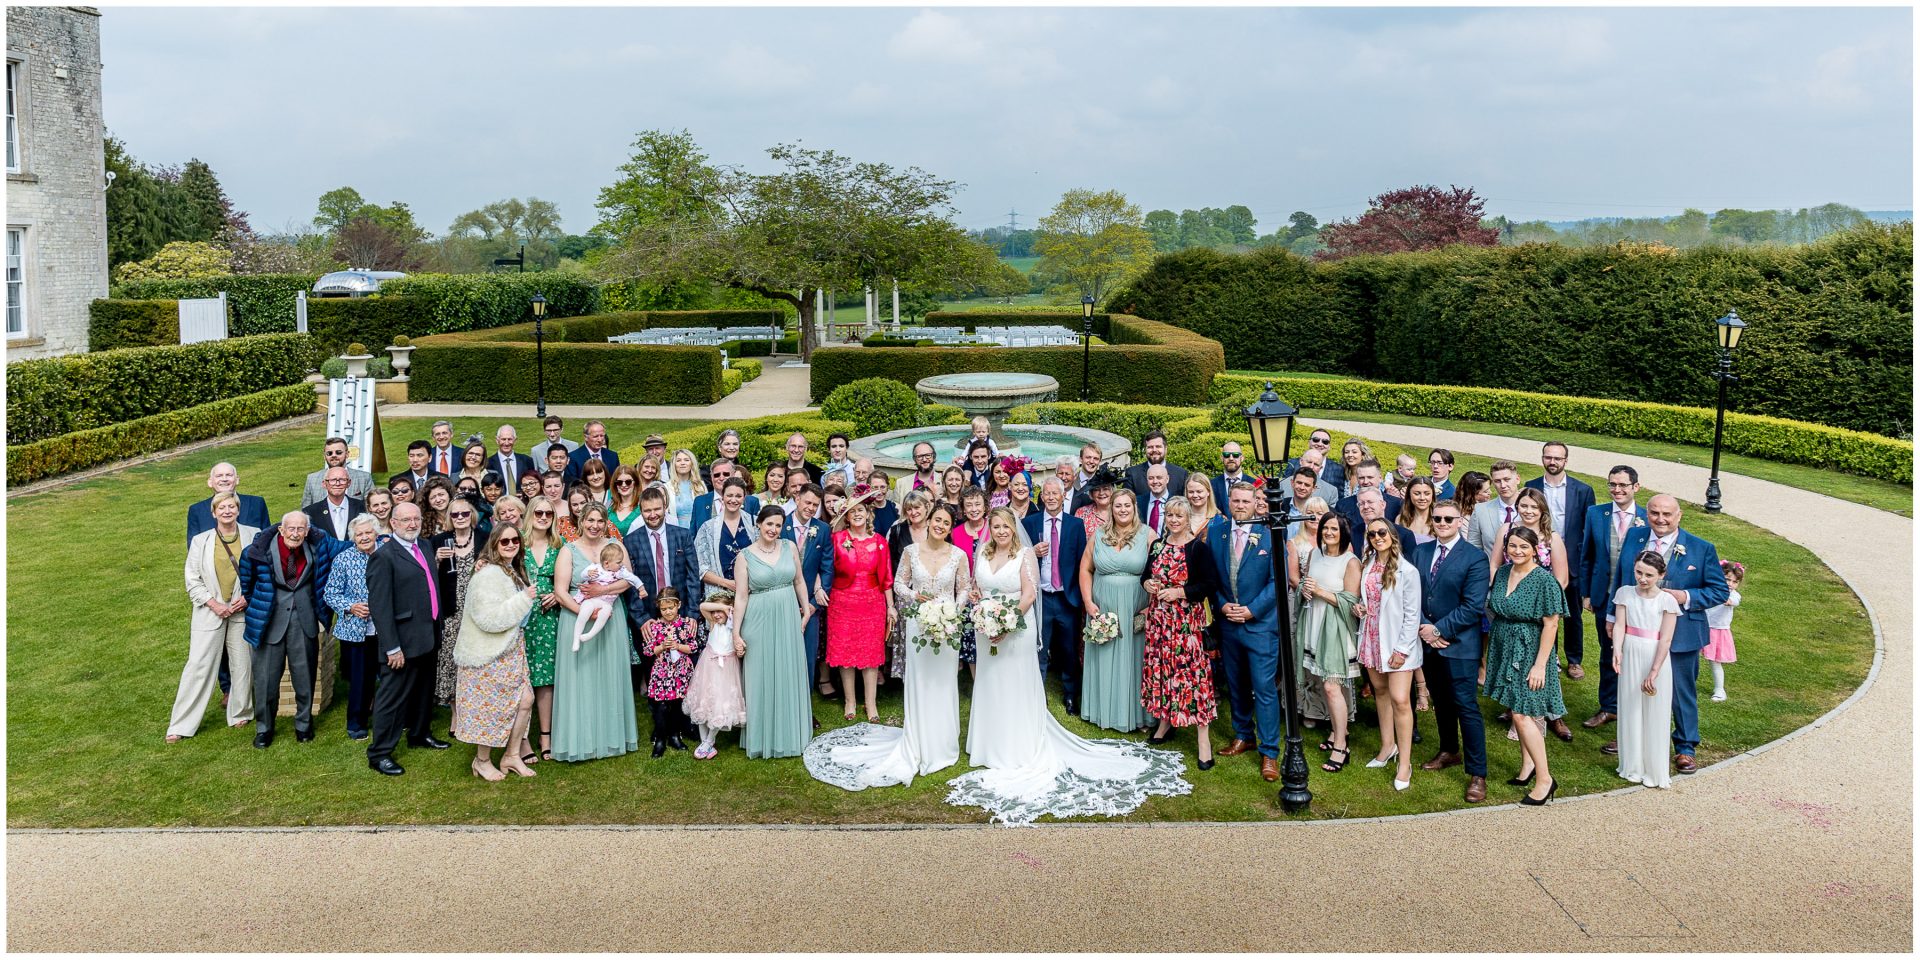 Group photo of all wedding guests in the gardens of Froyle Park Hampshire wedding venue